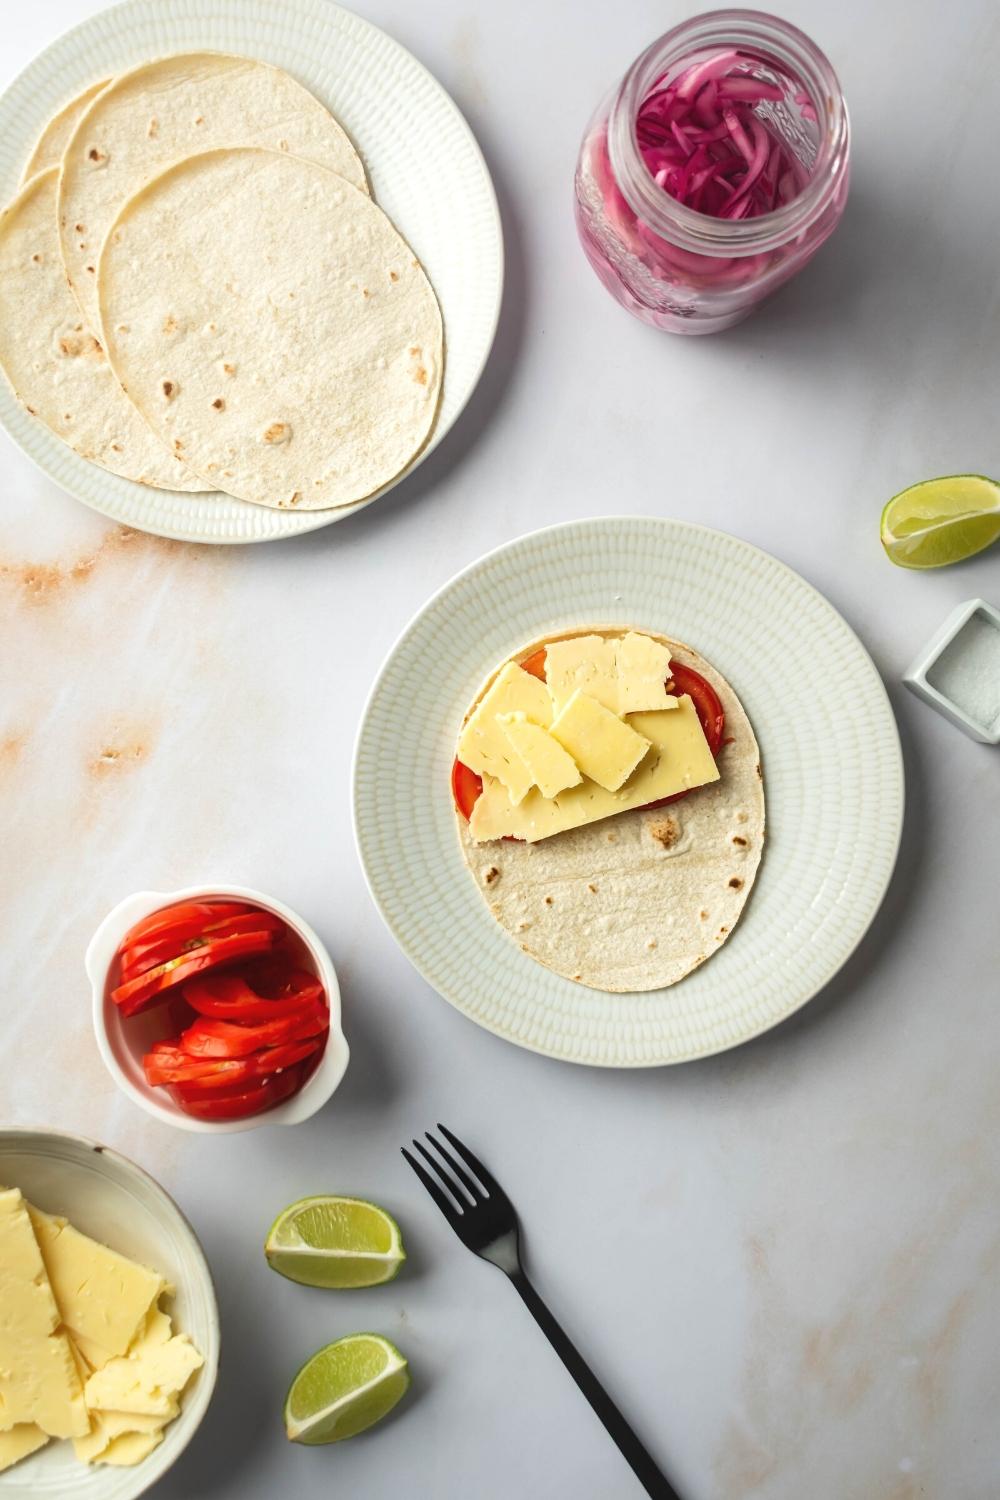 White plate with a tortilla on it with tomato and slices of cheese on top. Next to it is a small cup of sliced tomatoes and behind it as a plate with tortillas on it.